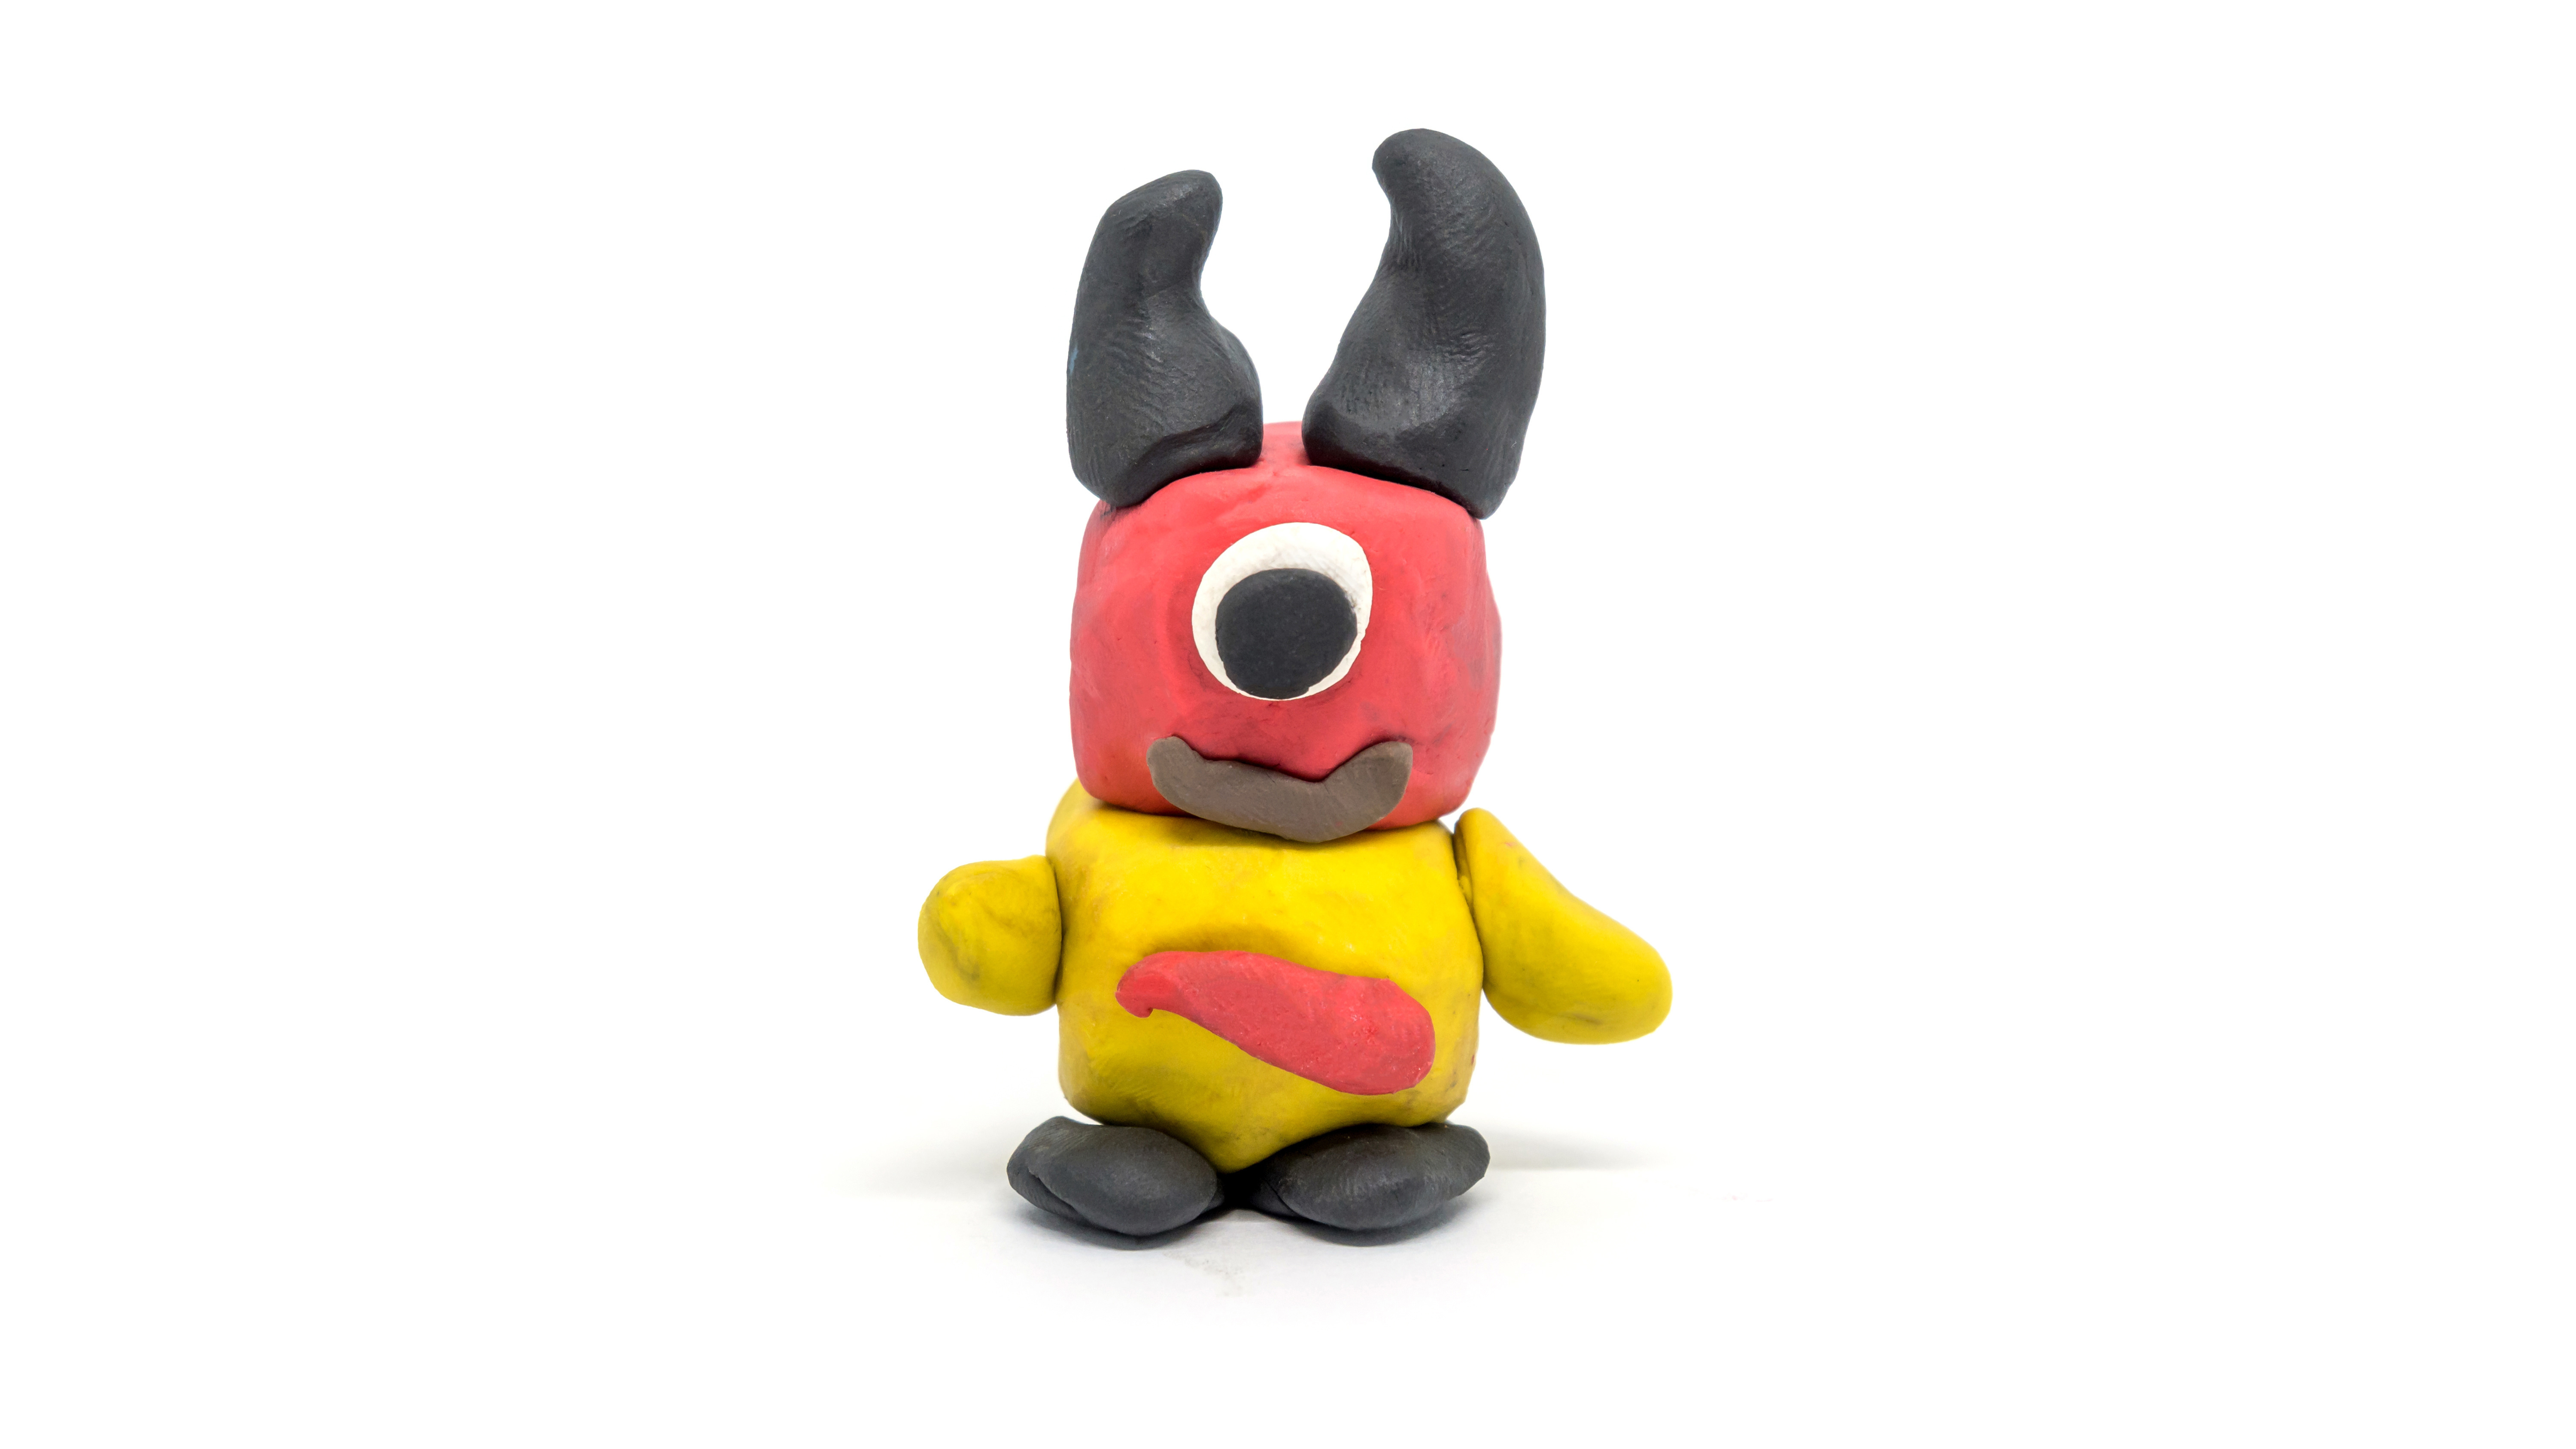 One-eyed, red, black and yellow plasticine monster on white background